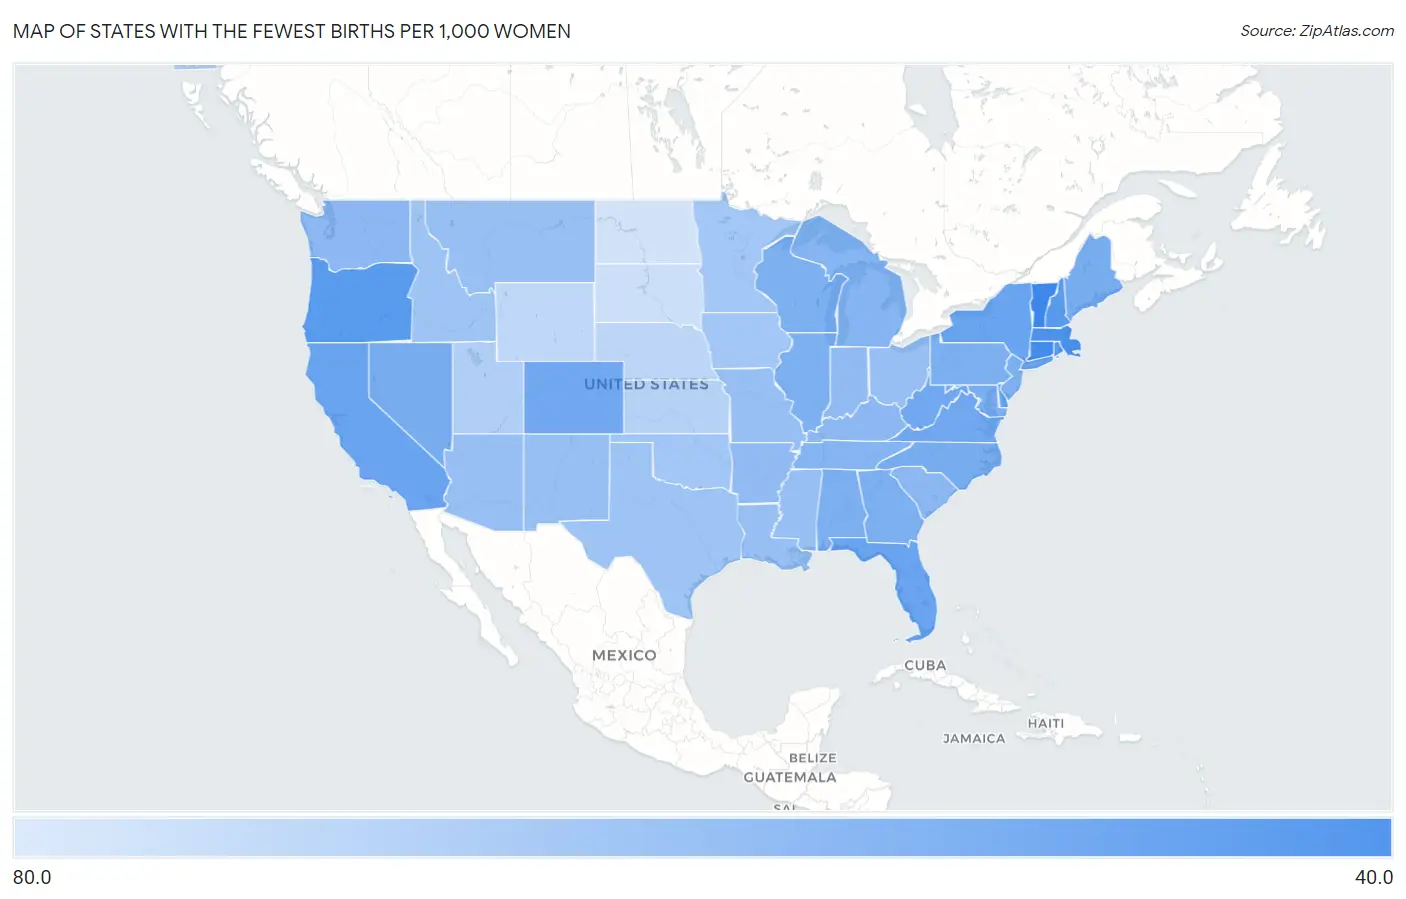 States with the Fewest Births per 1,000 Women in the United States Map